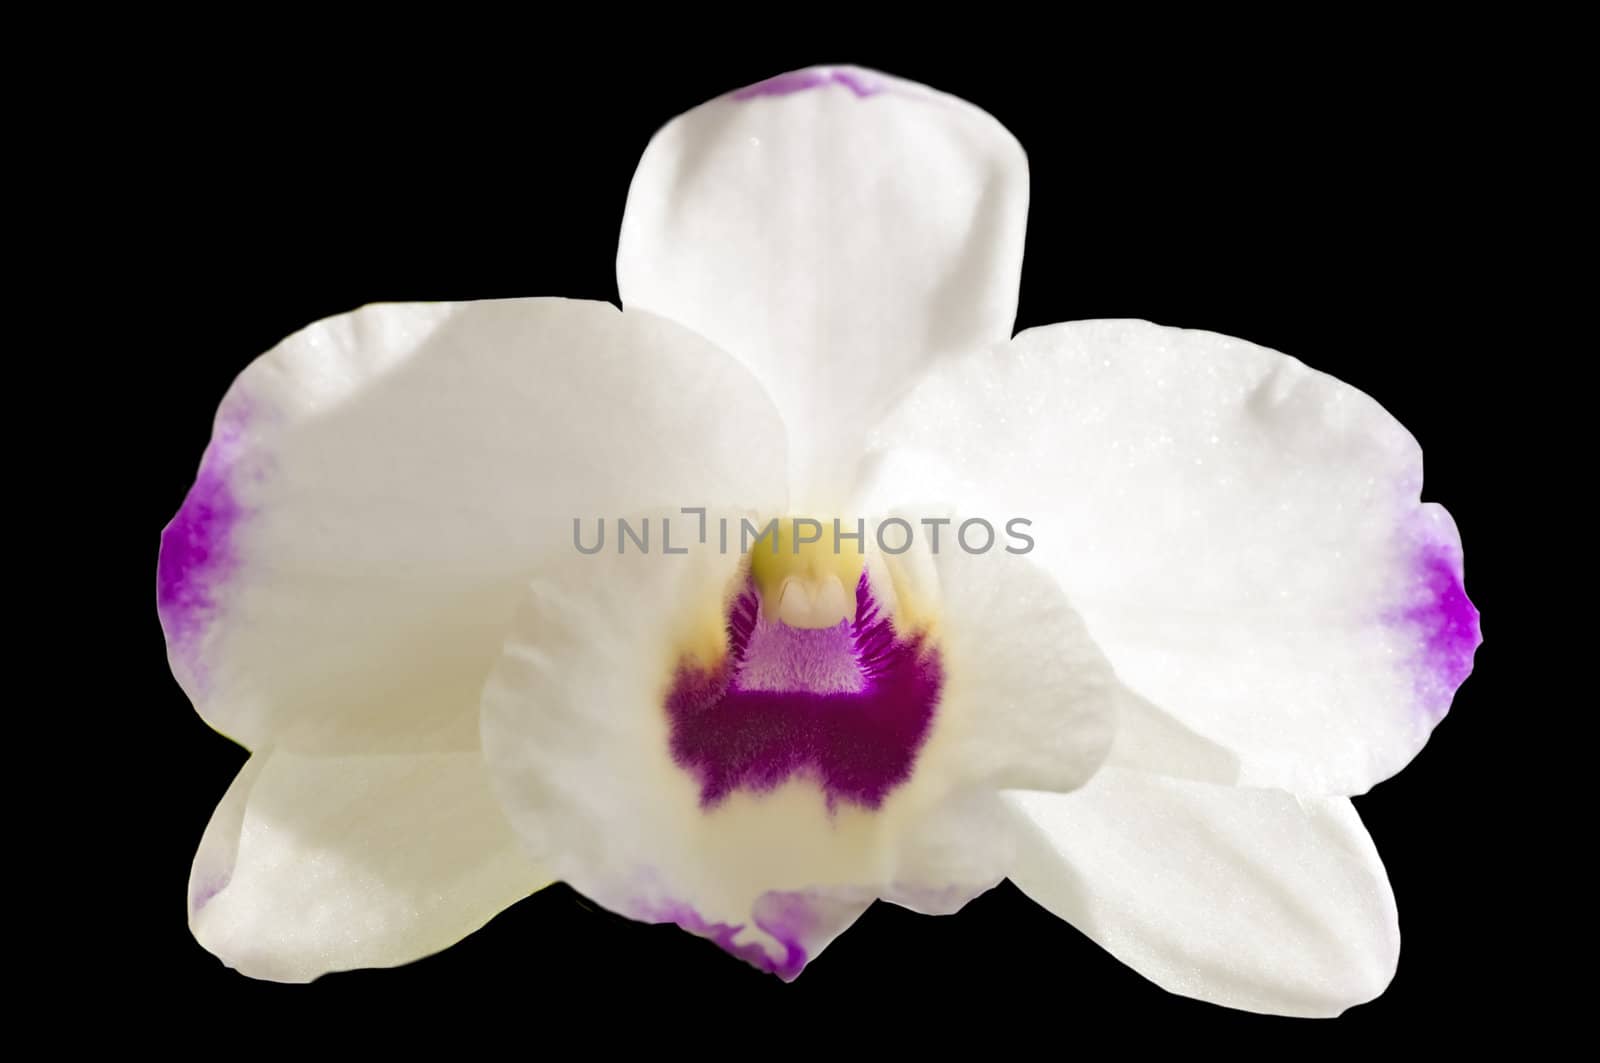 Dendrobium orchid cut-out on black background